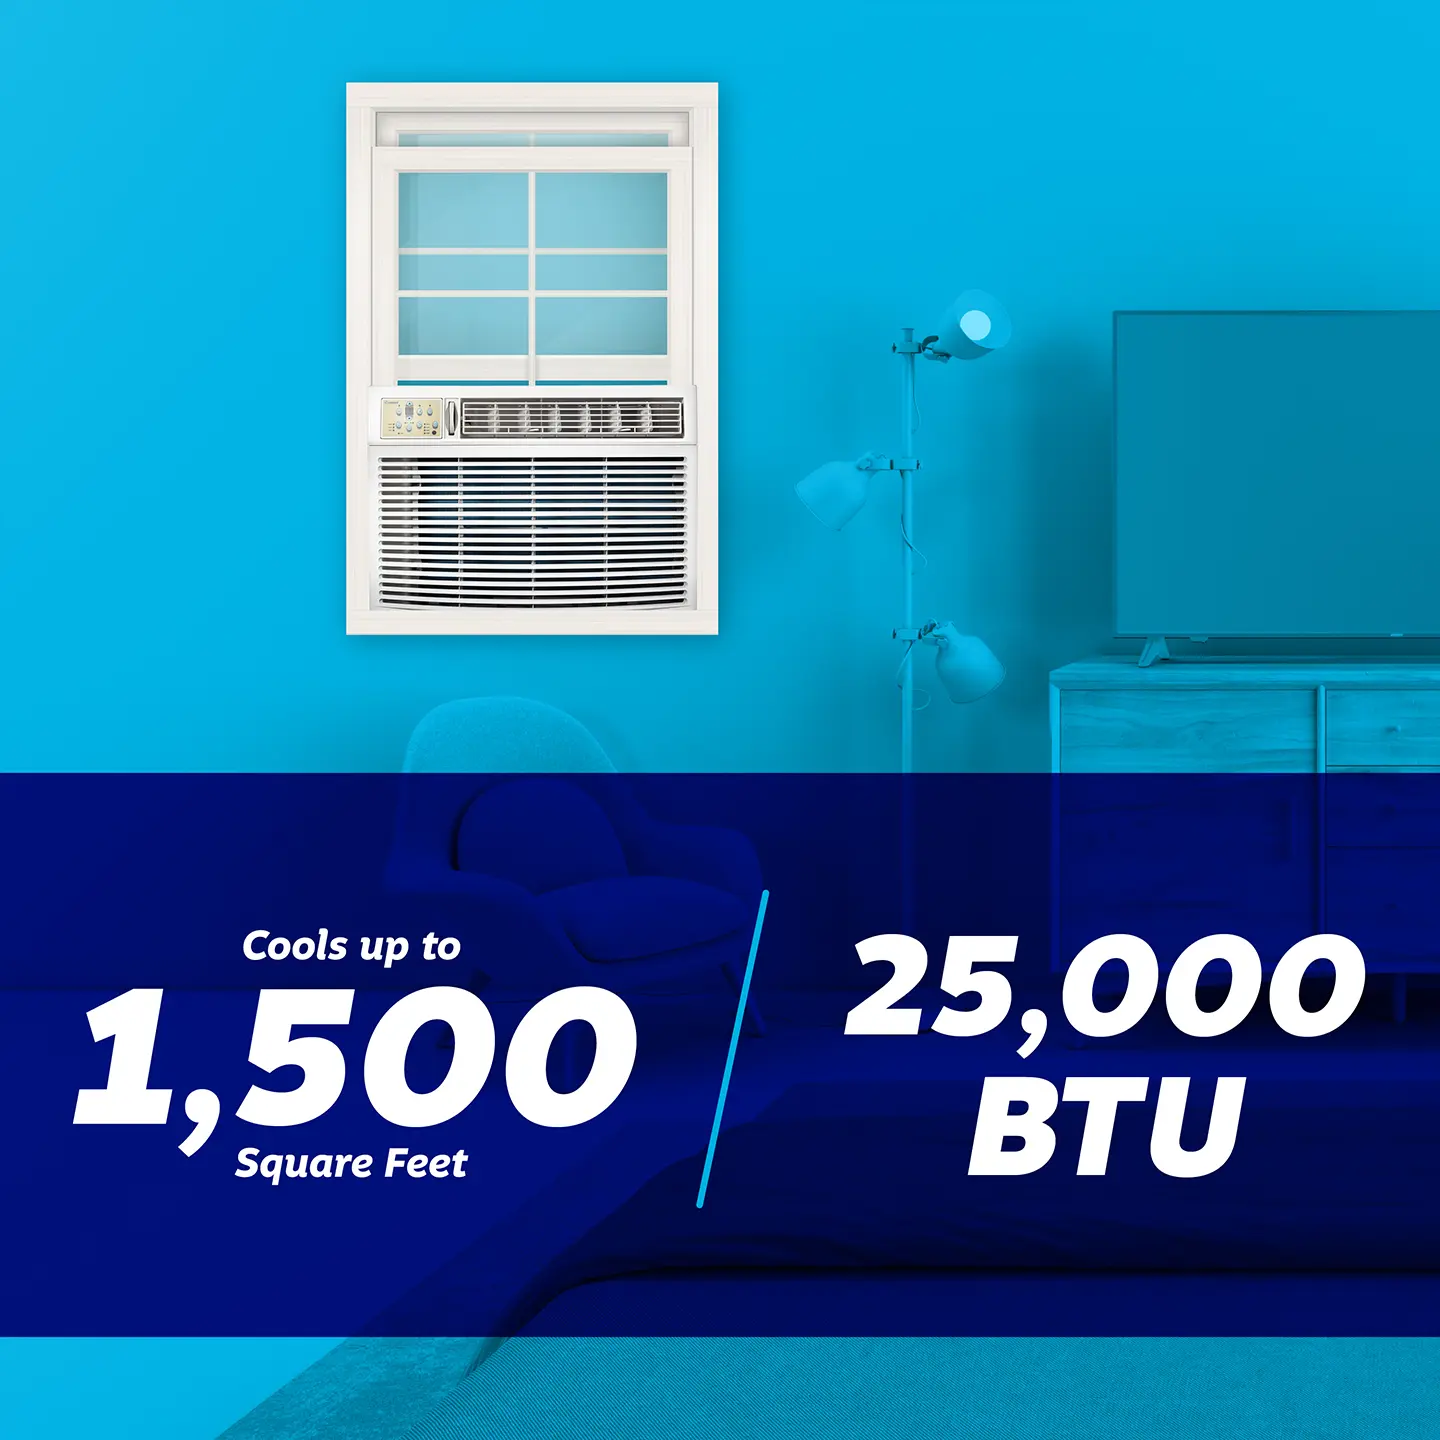 25,000 BTU Air Conditioner - cools rooms up to 1,500 square feet